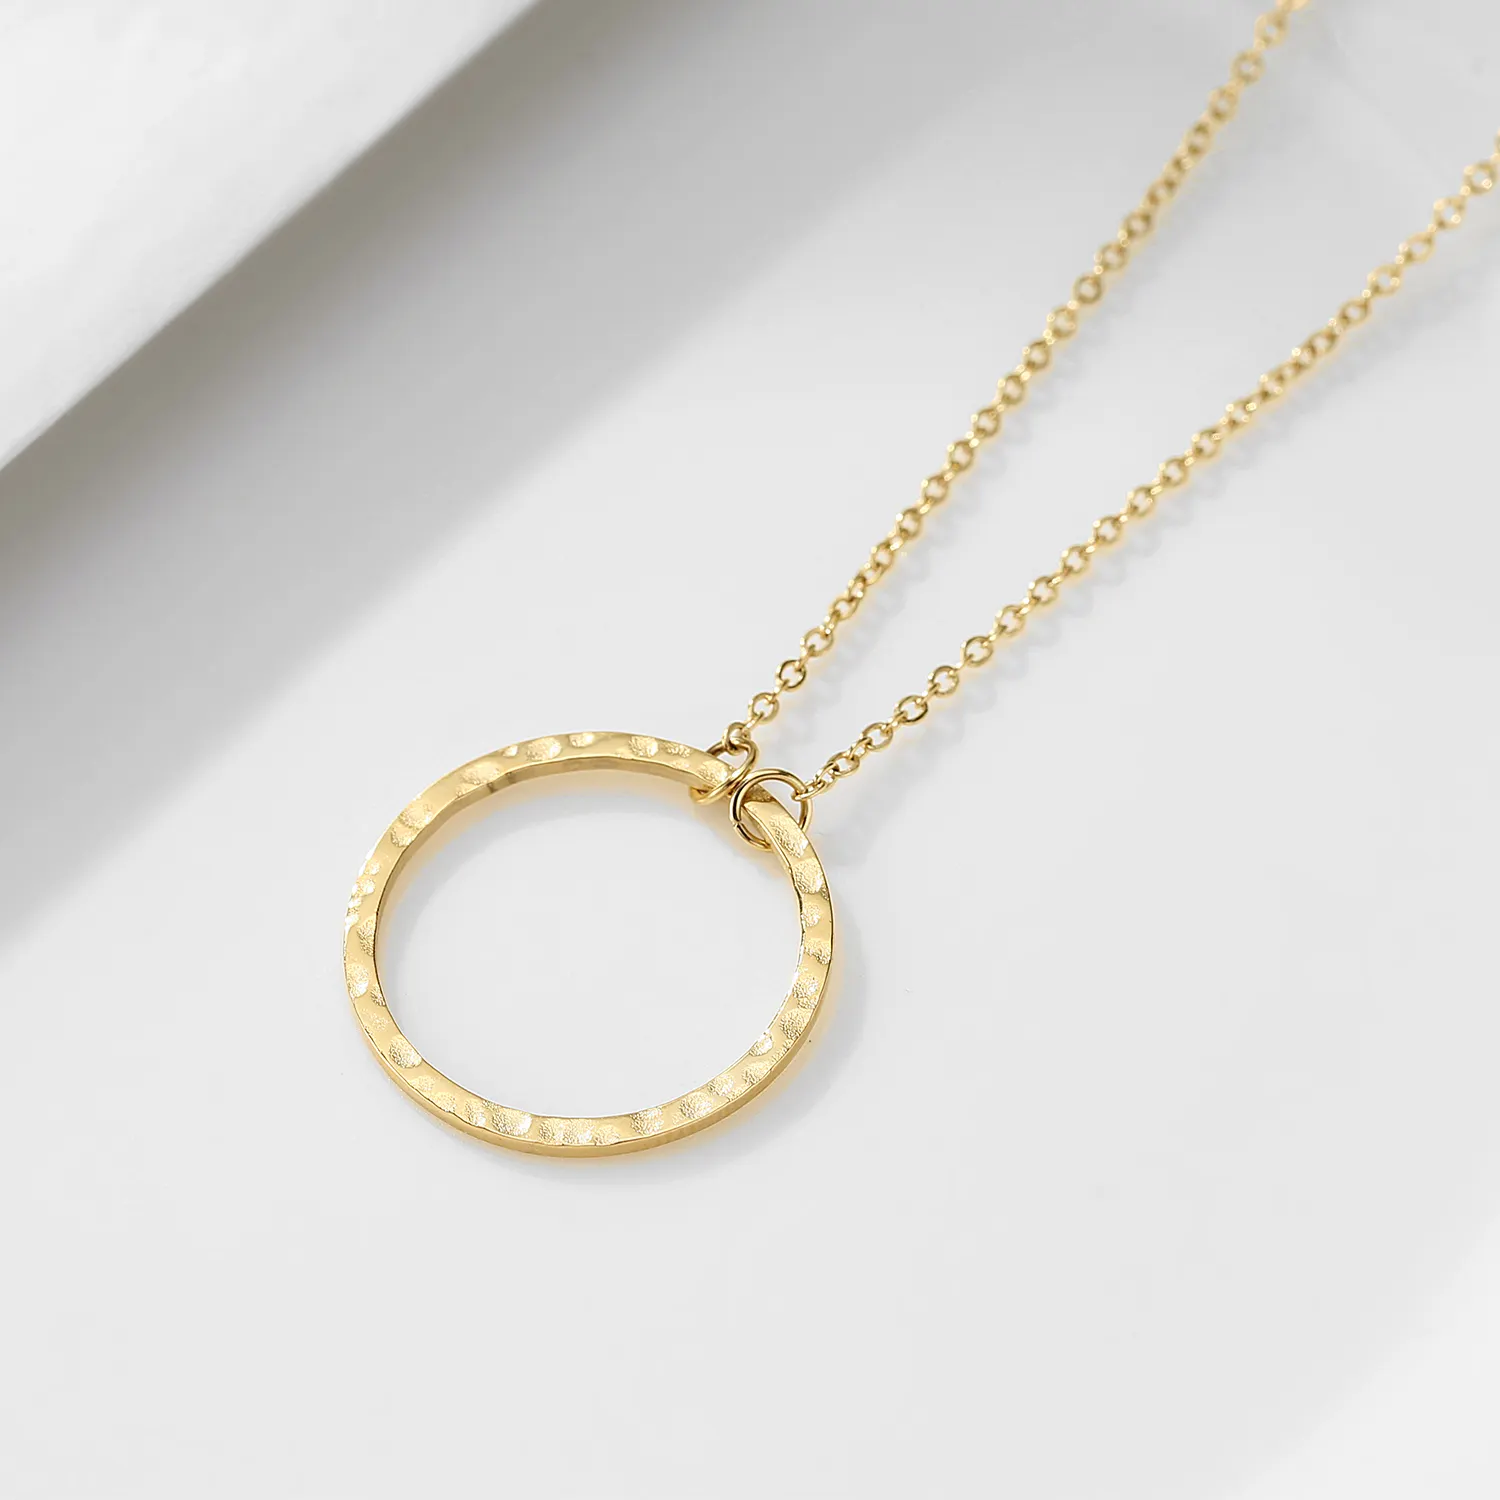 eManco Minimal stainless steel round pendant personality accessories necklace ladies collarbone chain